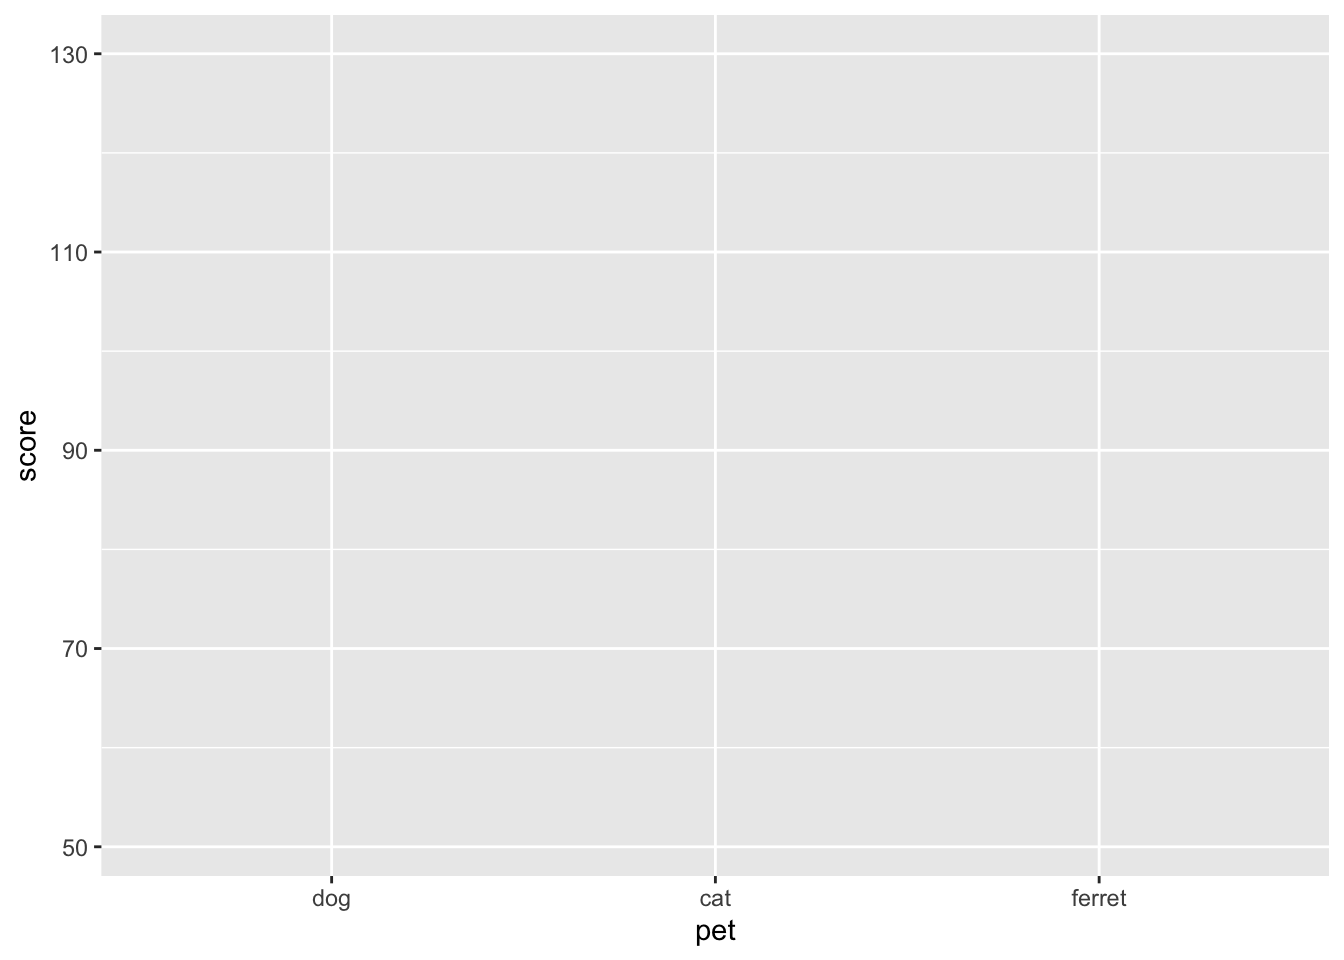 Empty ggplot with x and y labels